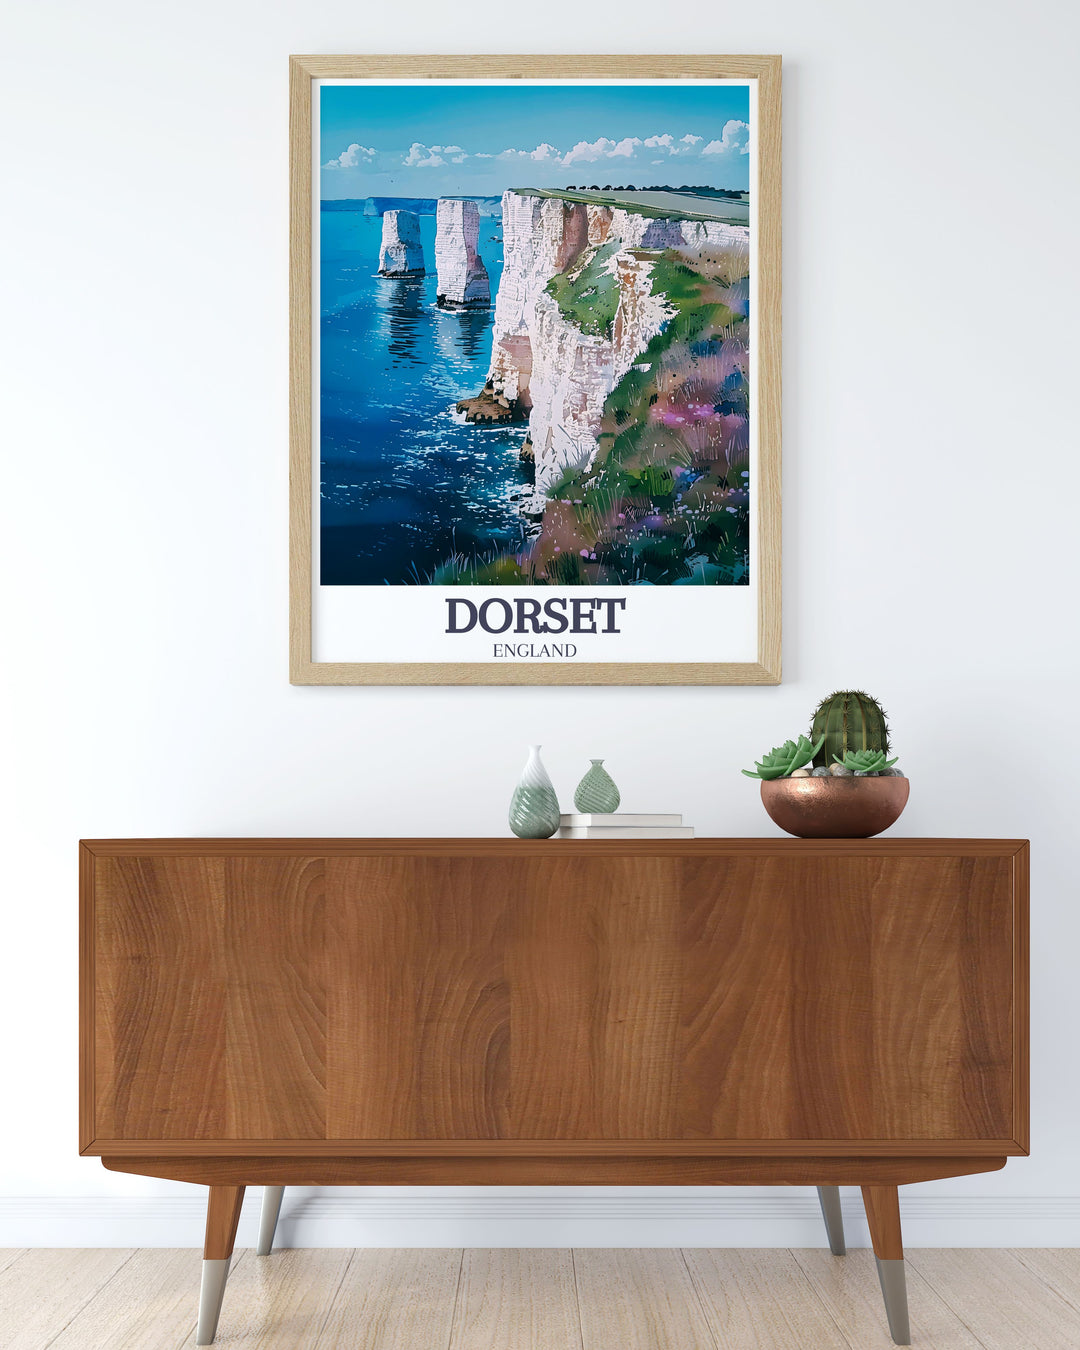 Dorsets scenic coastline is depicted in this poster, celebrating its natural beauty and ancient landscapes, ideal for adding a touch of coastal charm to your home.